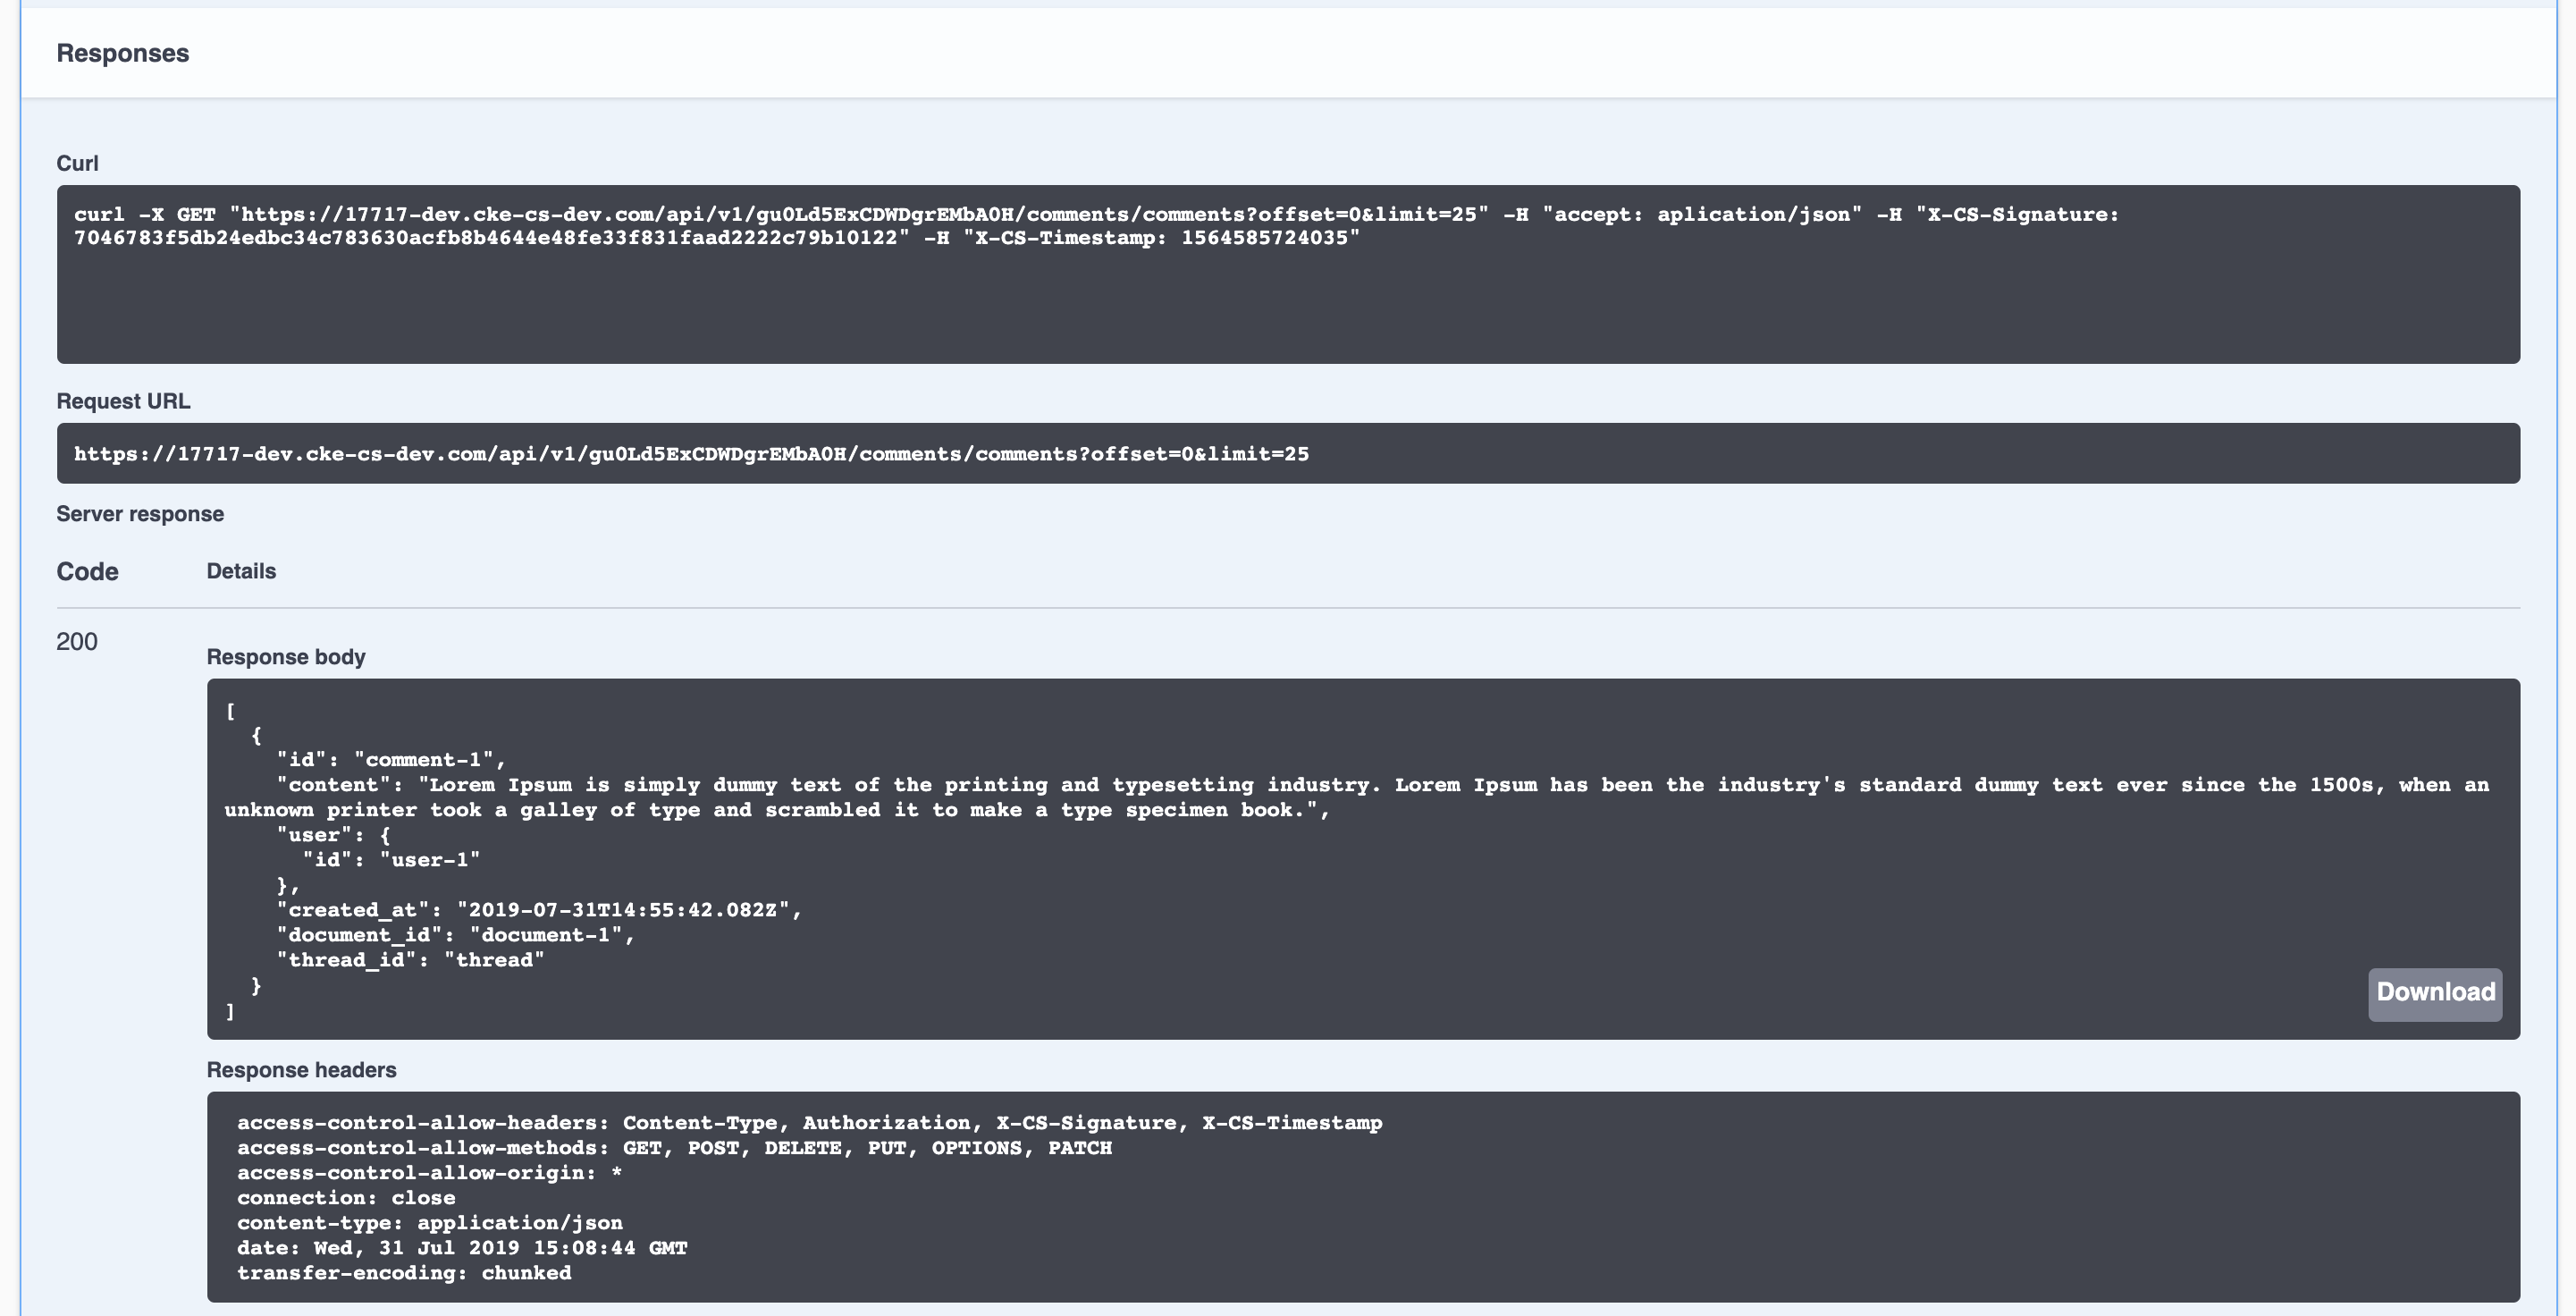 API response from an endpoint in CKEditor Cloud Services.